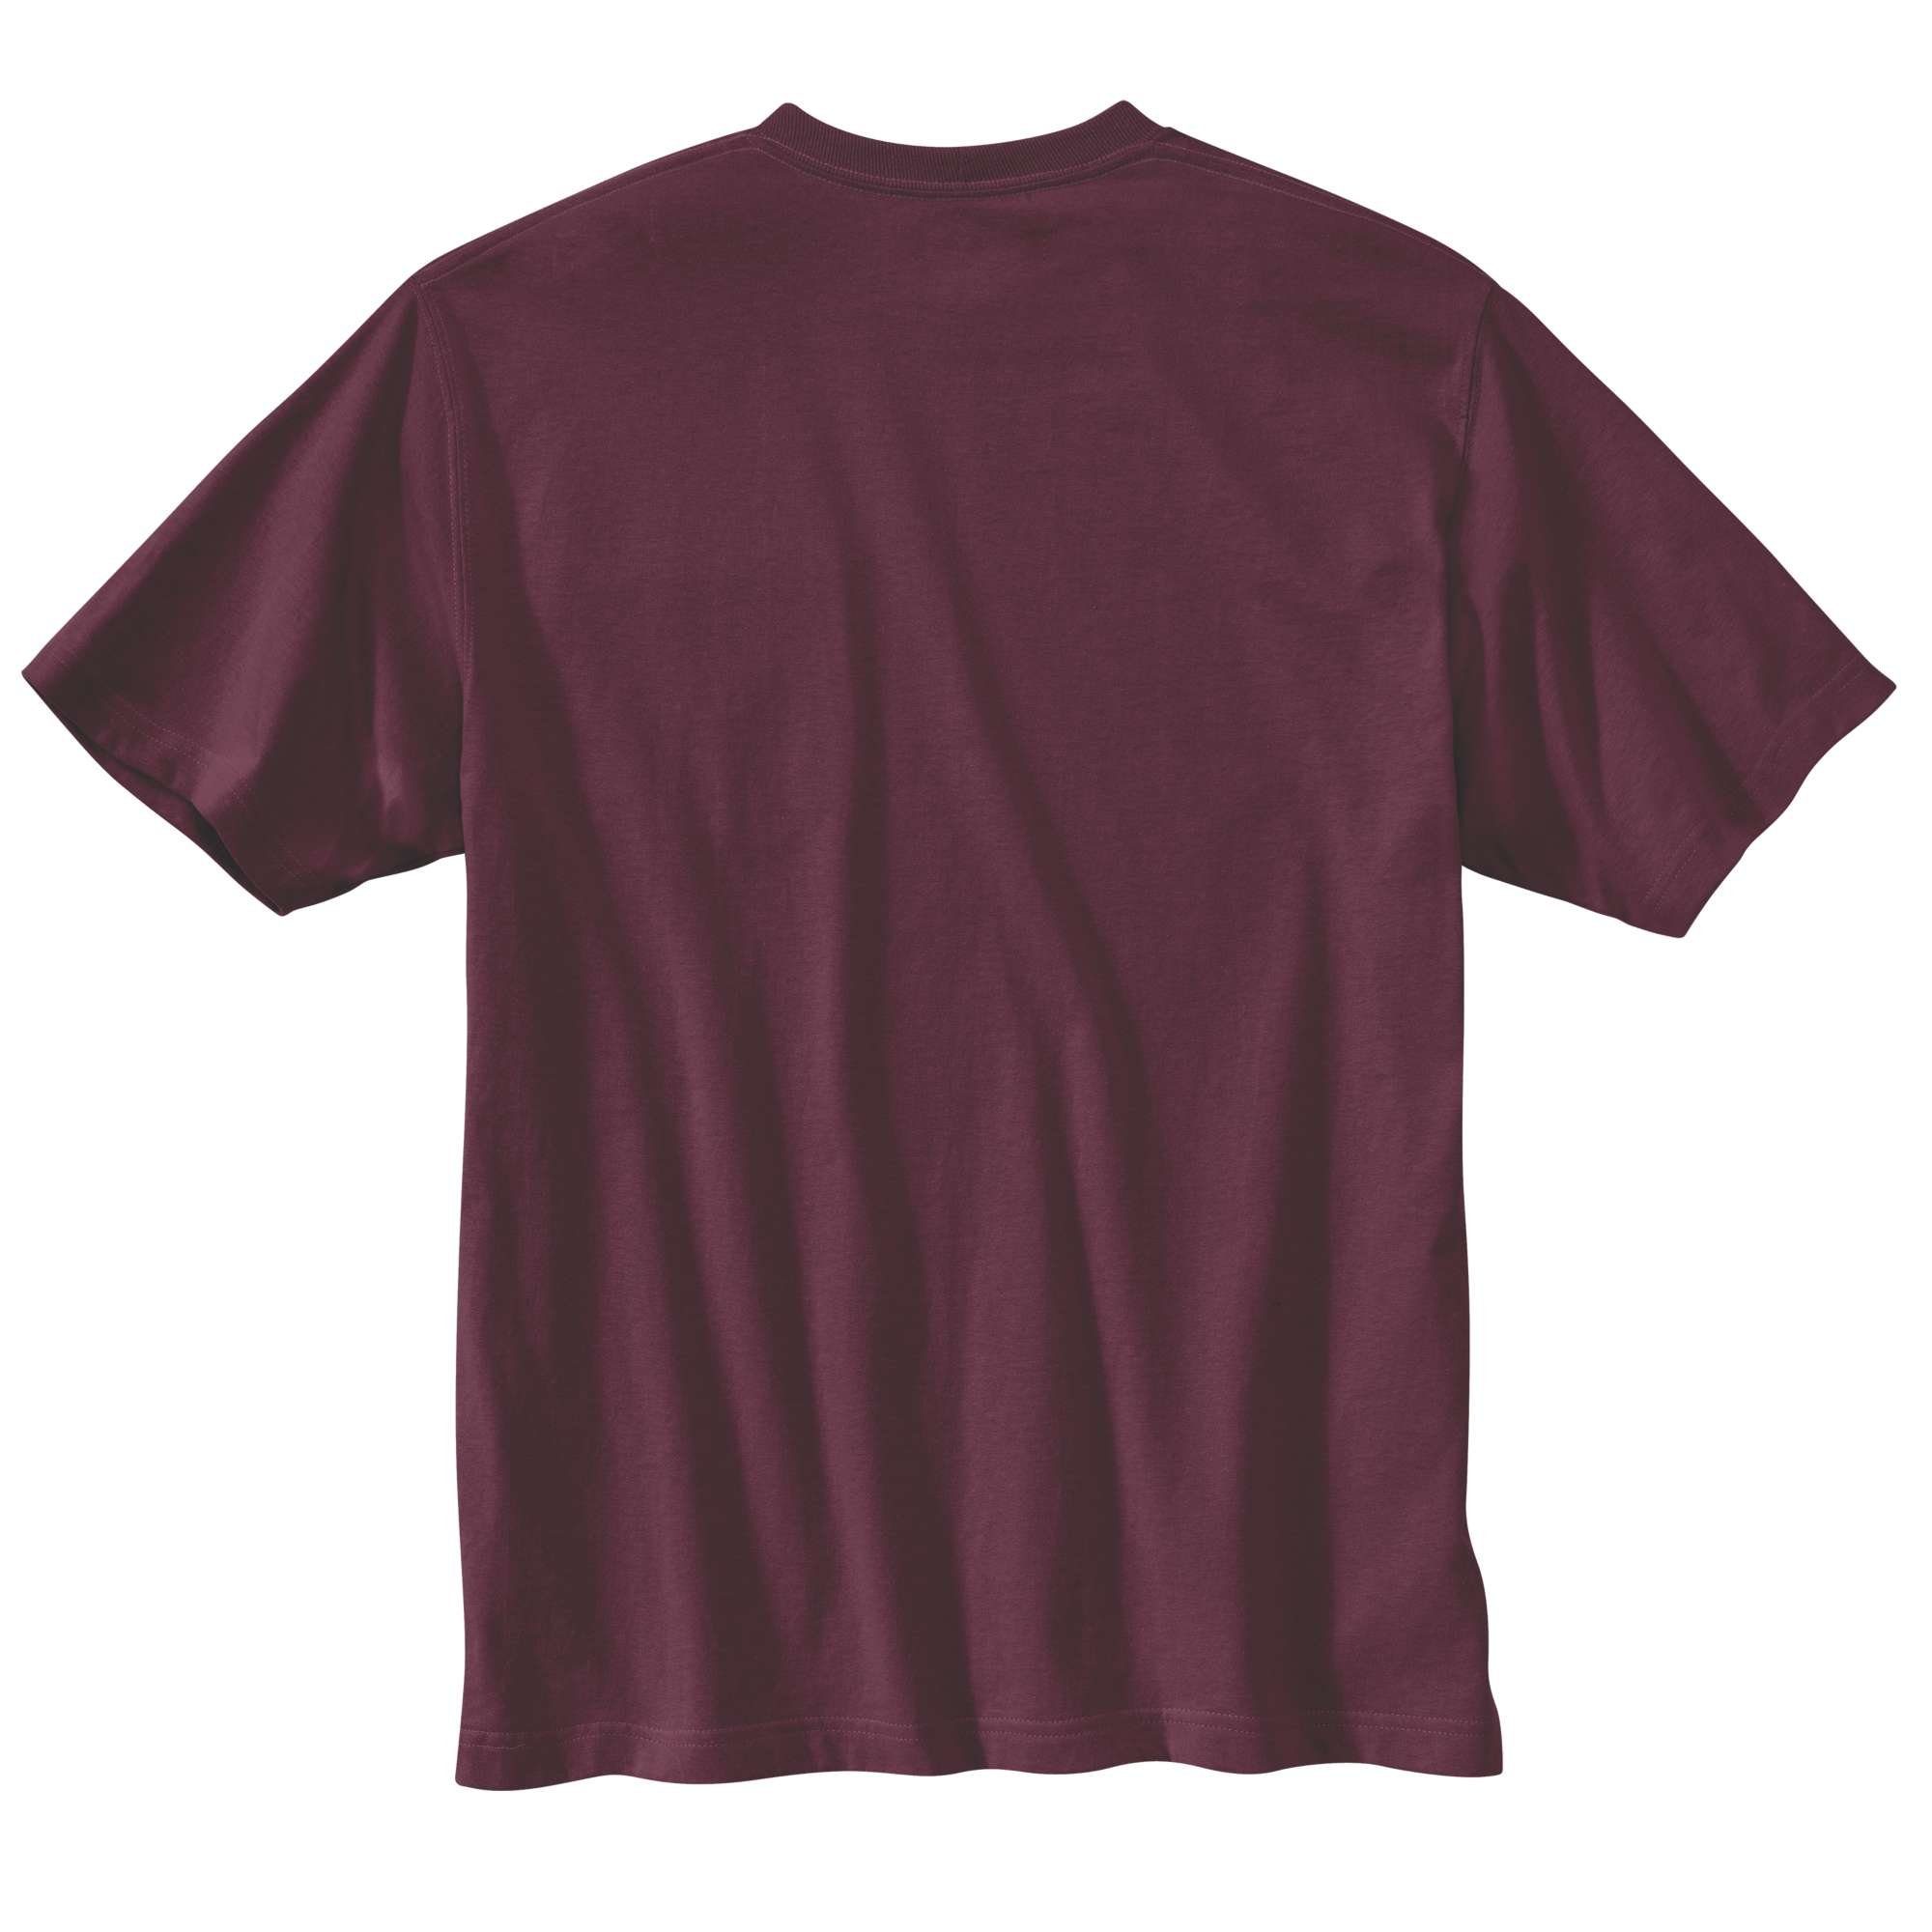 Fit Relaxed Port T-Shirt Carhartt Graphic, Craft Fit Relaxed